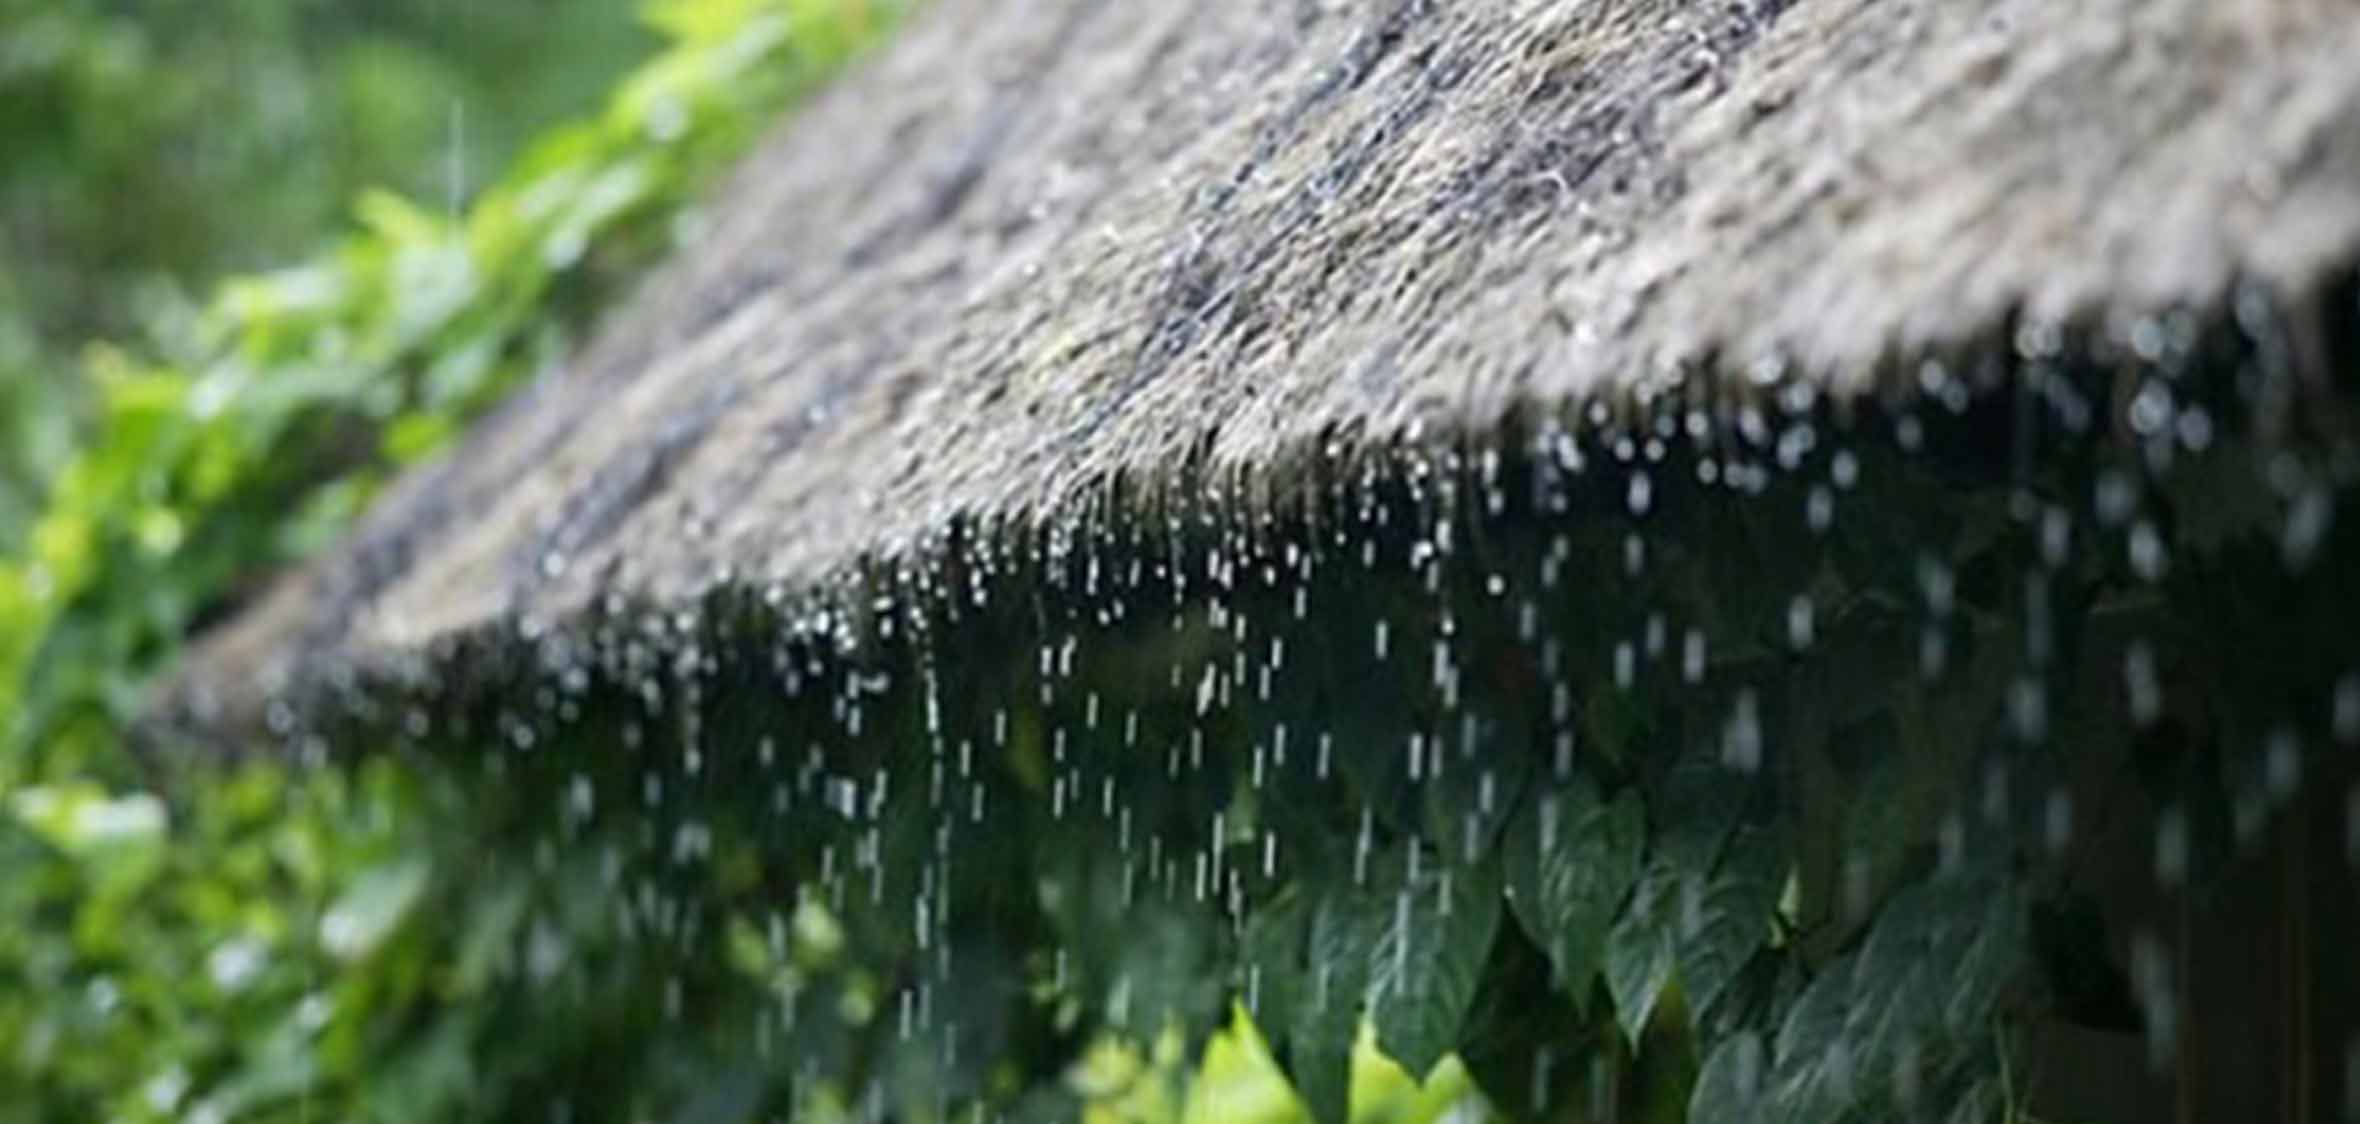 Rain falling from a thatched roof